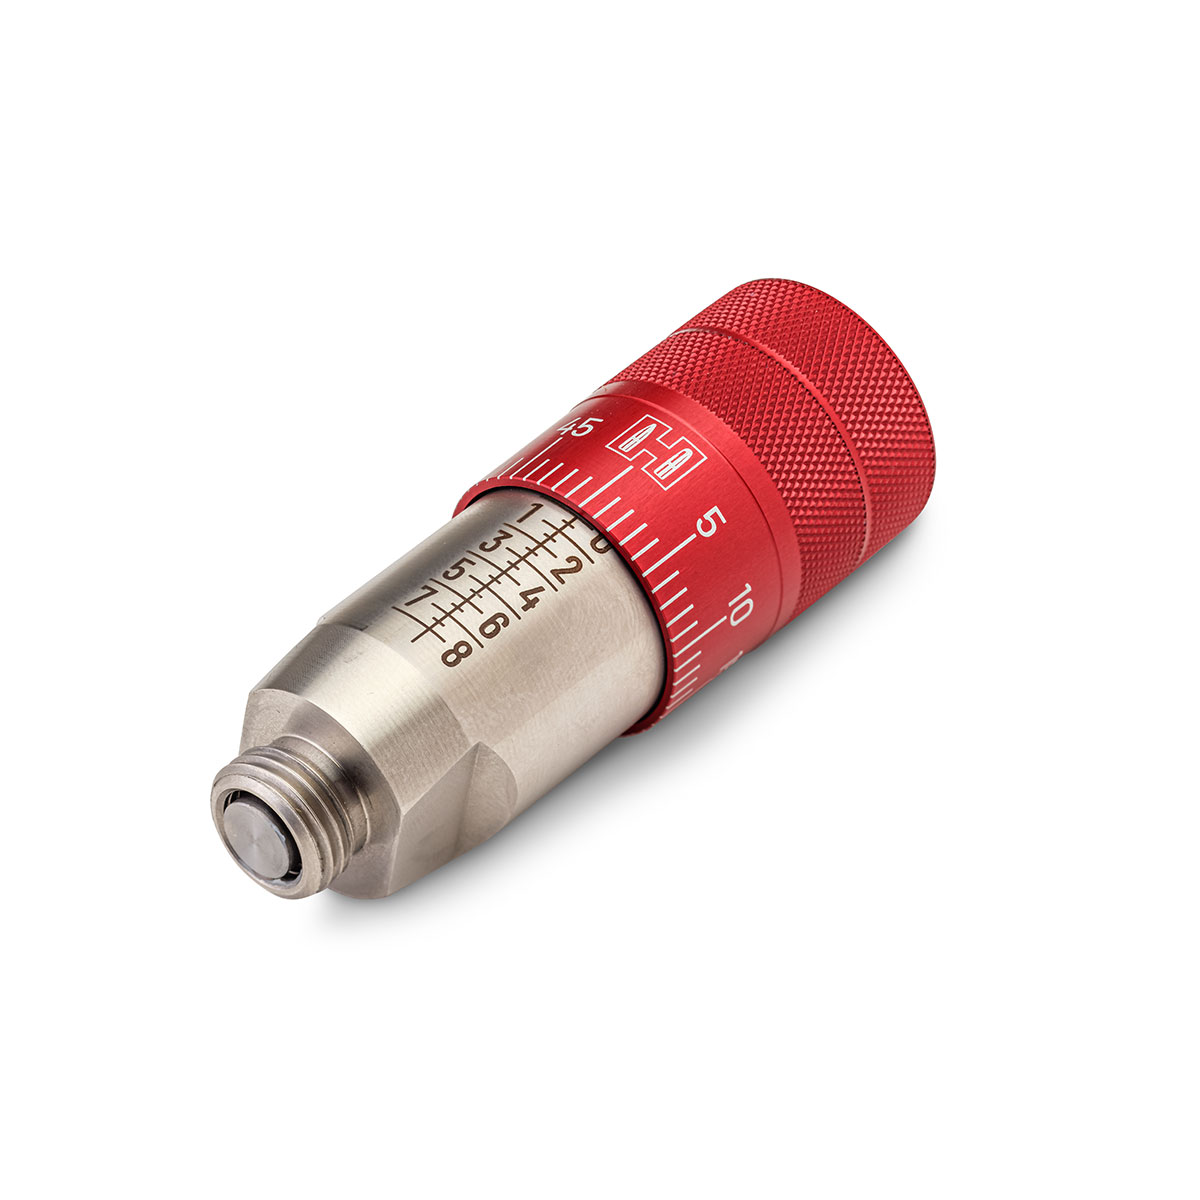 HORNADY - CLICK-ADJUST BULLET SEATING MICROMETER